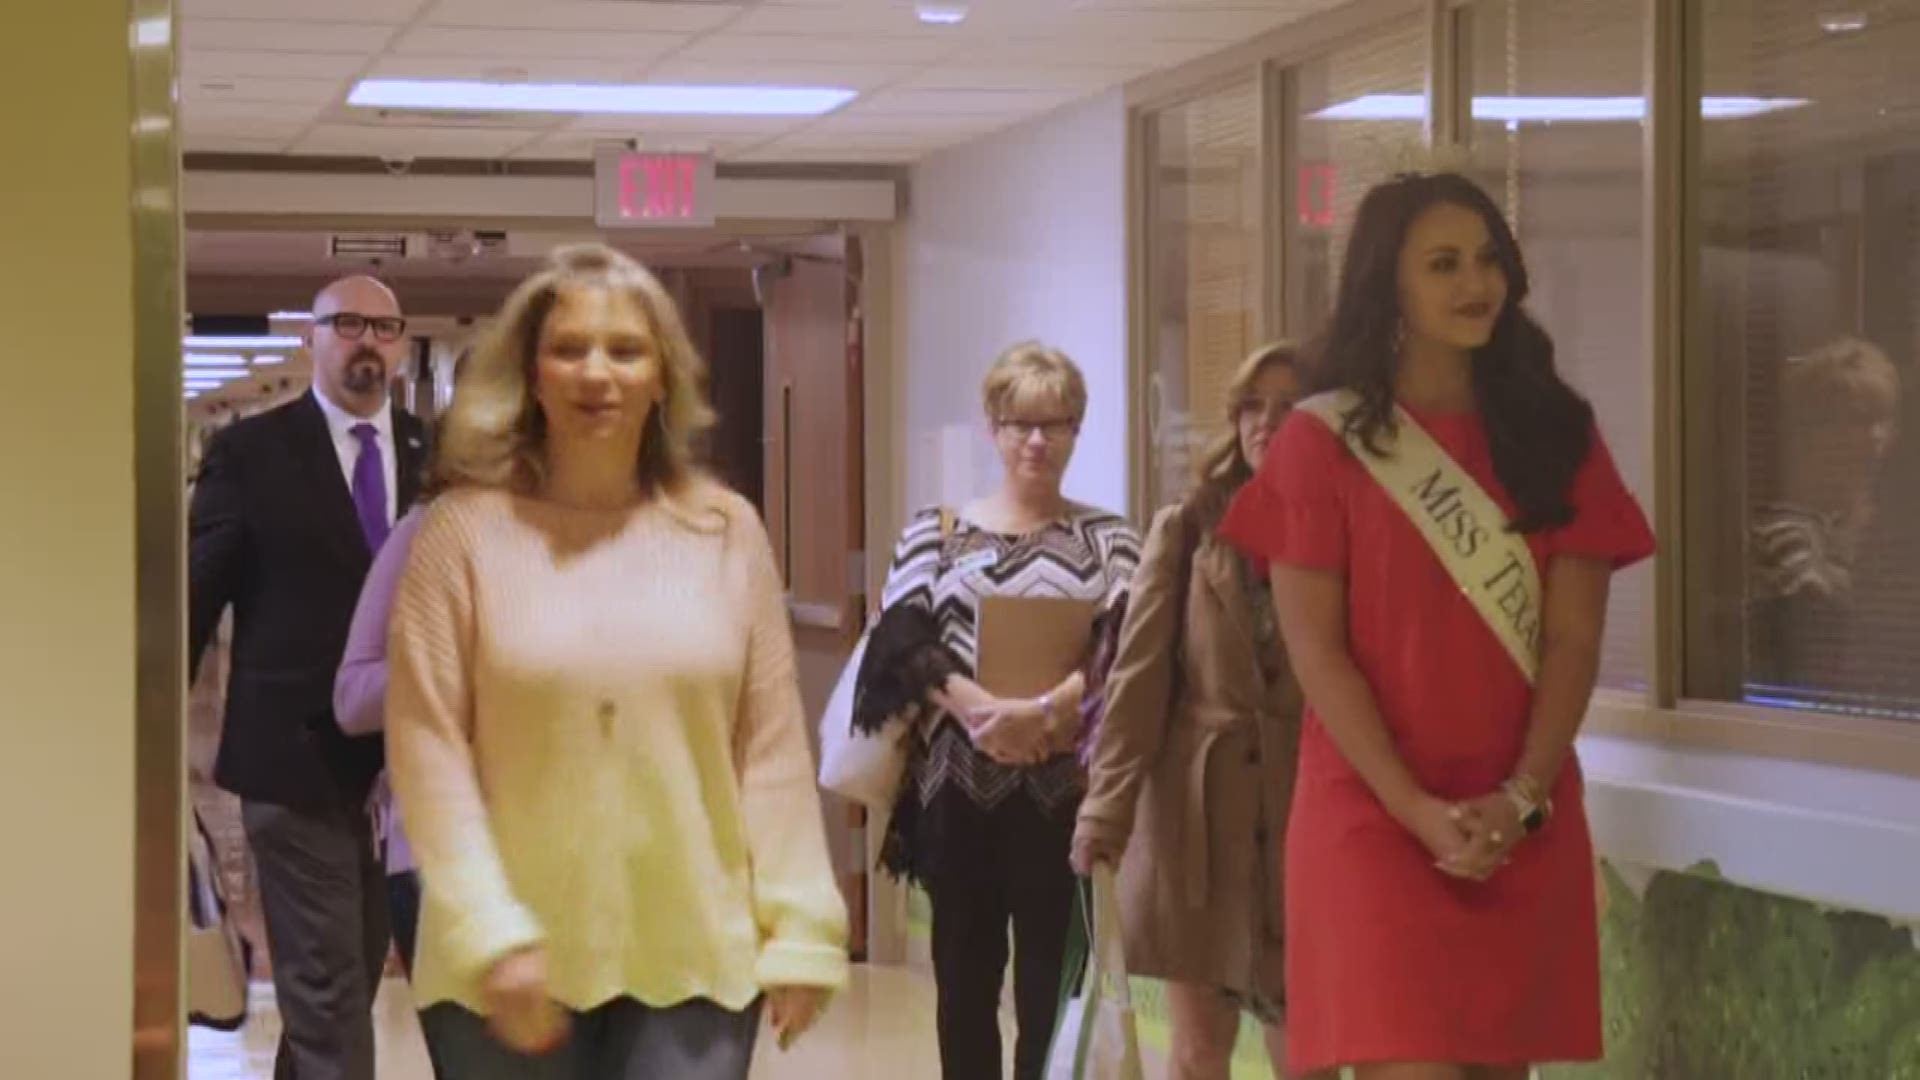 Miss Texas planned on seeing as many hospitals in the Children's Miracle Network as possible.